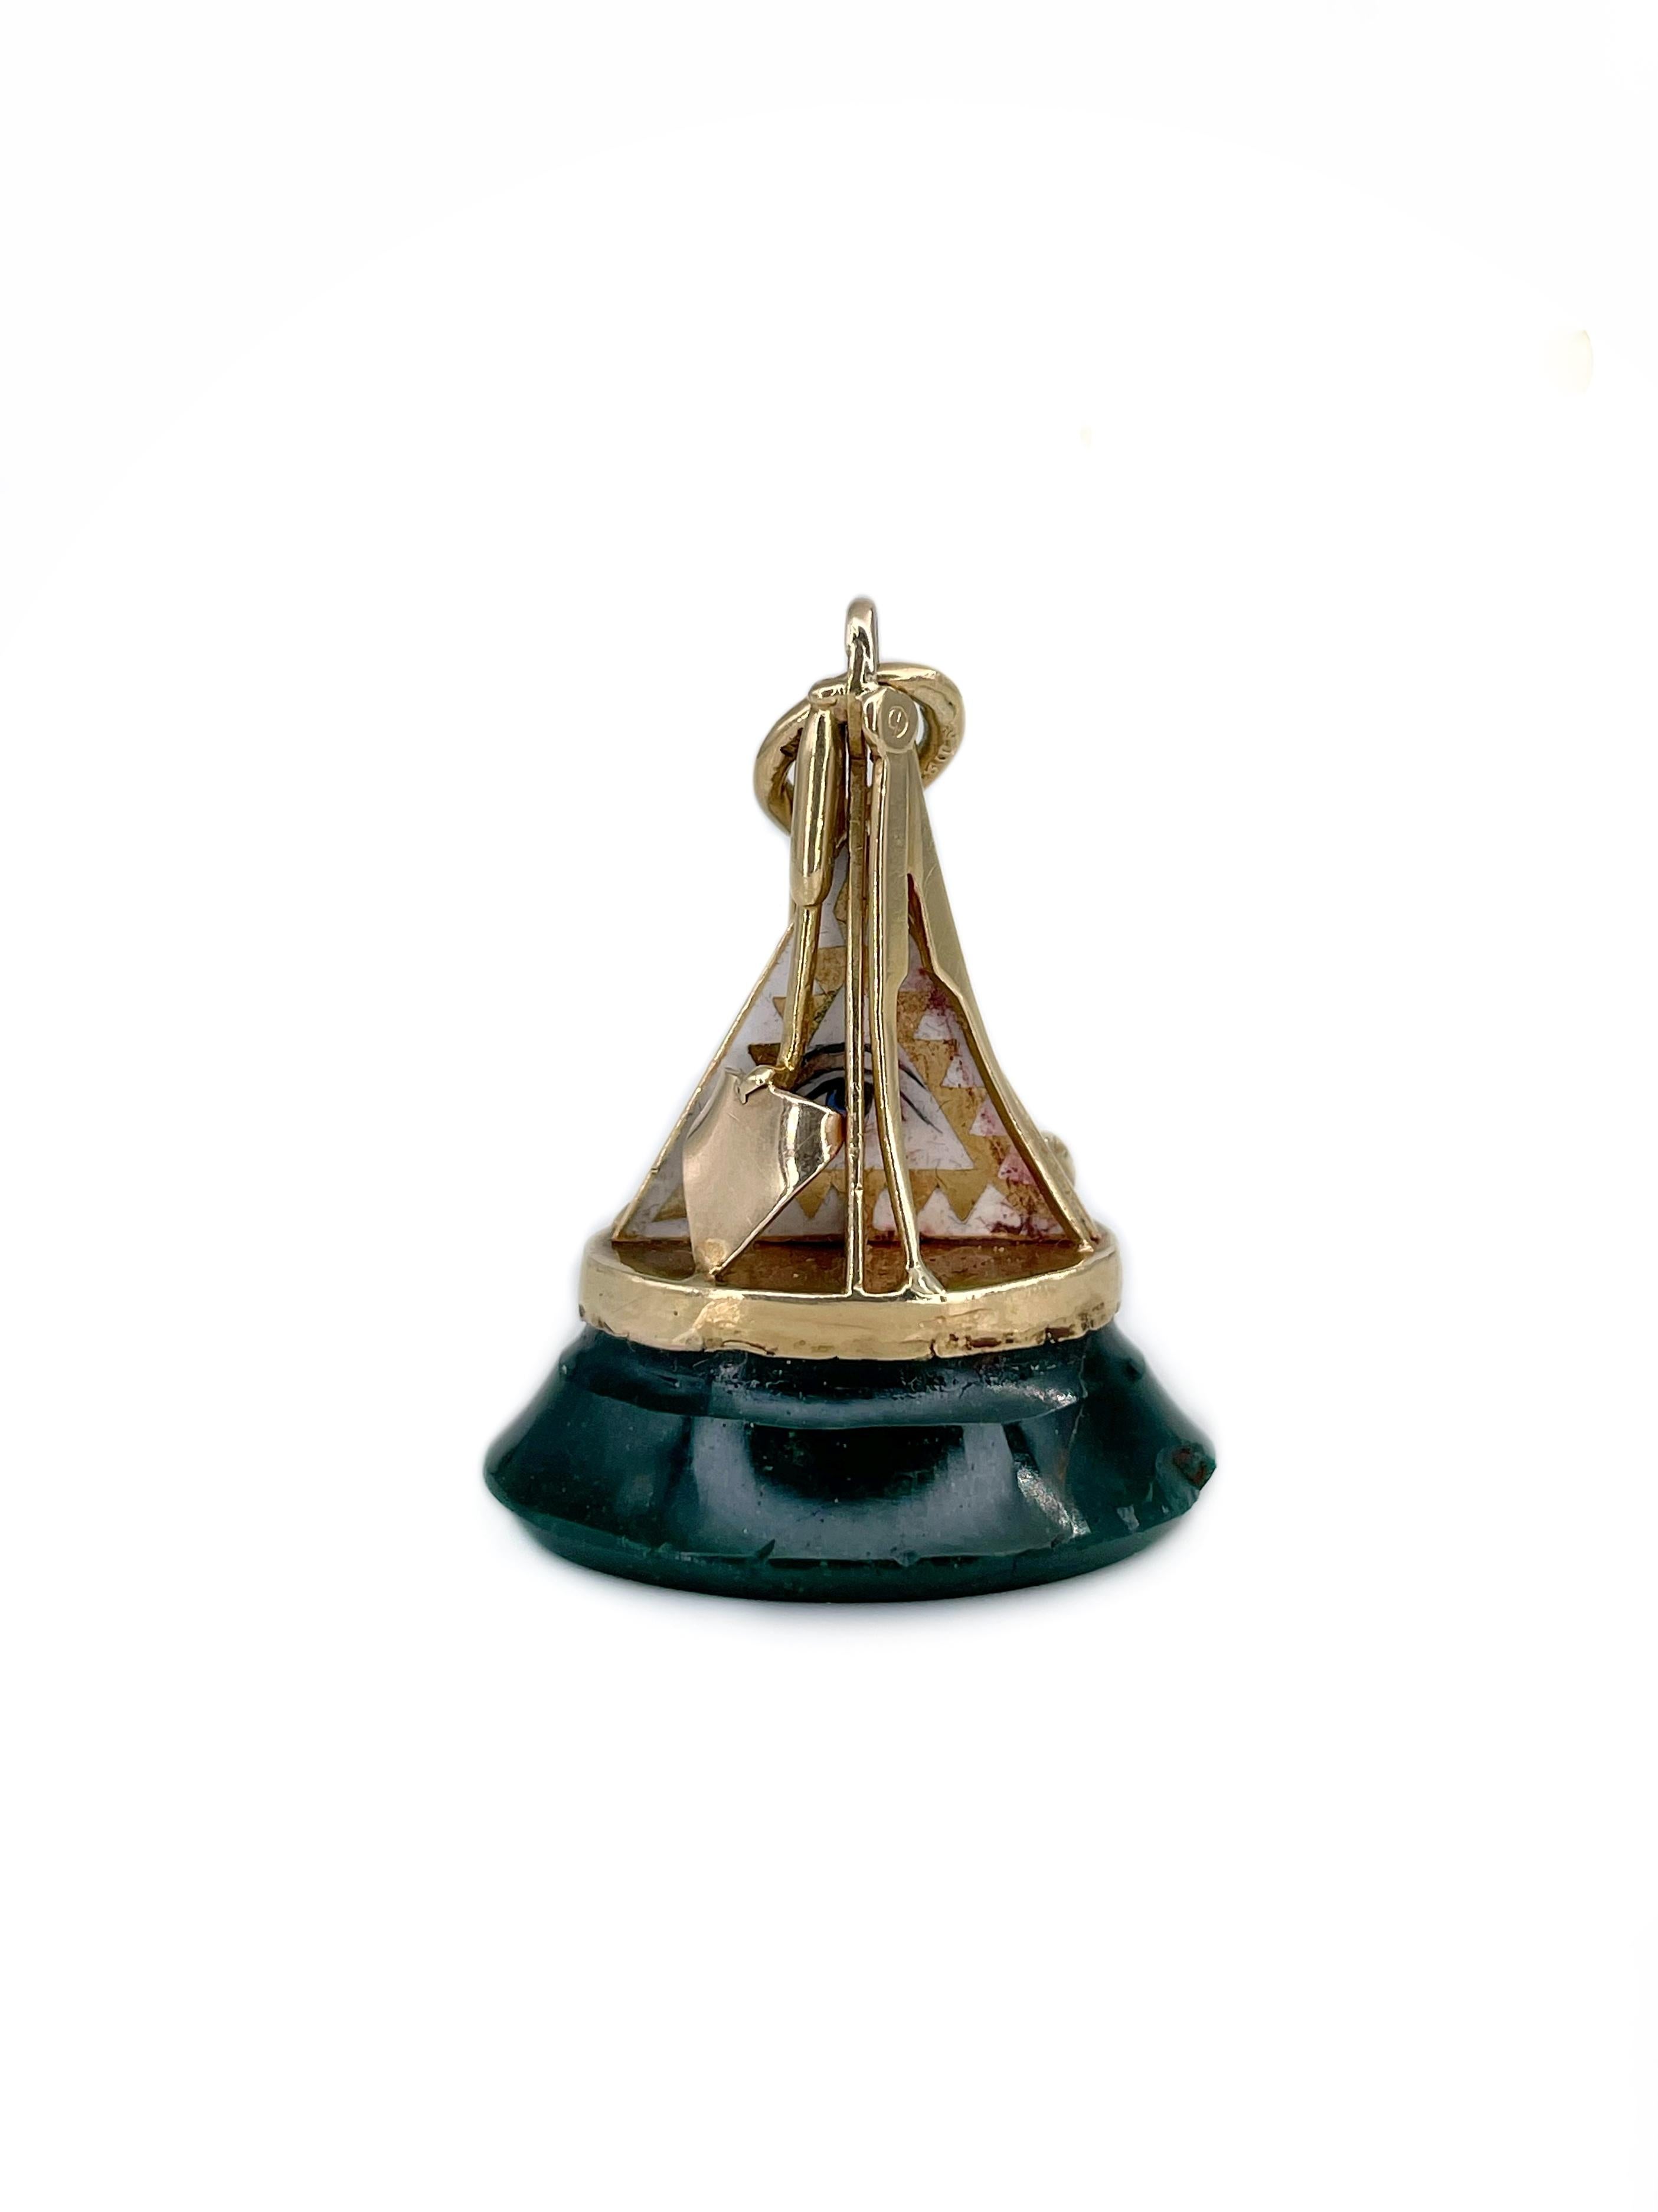 This is a Masonic fob seal pendant crafted in 18K gold. It depicts the symbols of Freemasonry: square, compasses, gavel, trowel and the all seeing eye. The piece features oval heliotrope (also known as bloodstone) - one edge has a minor damage.